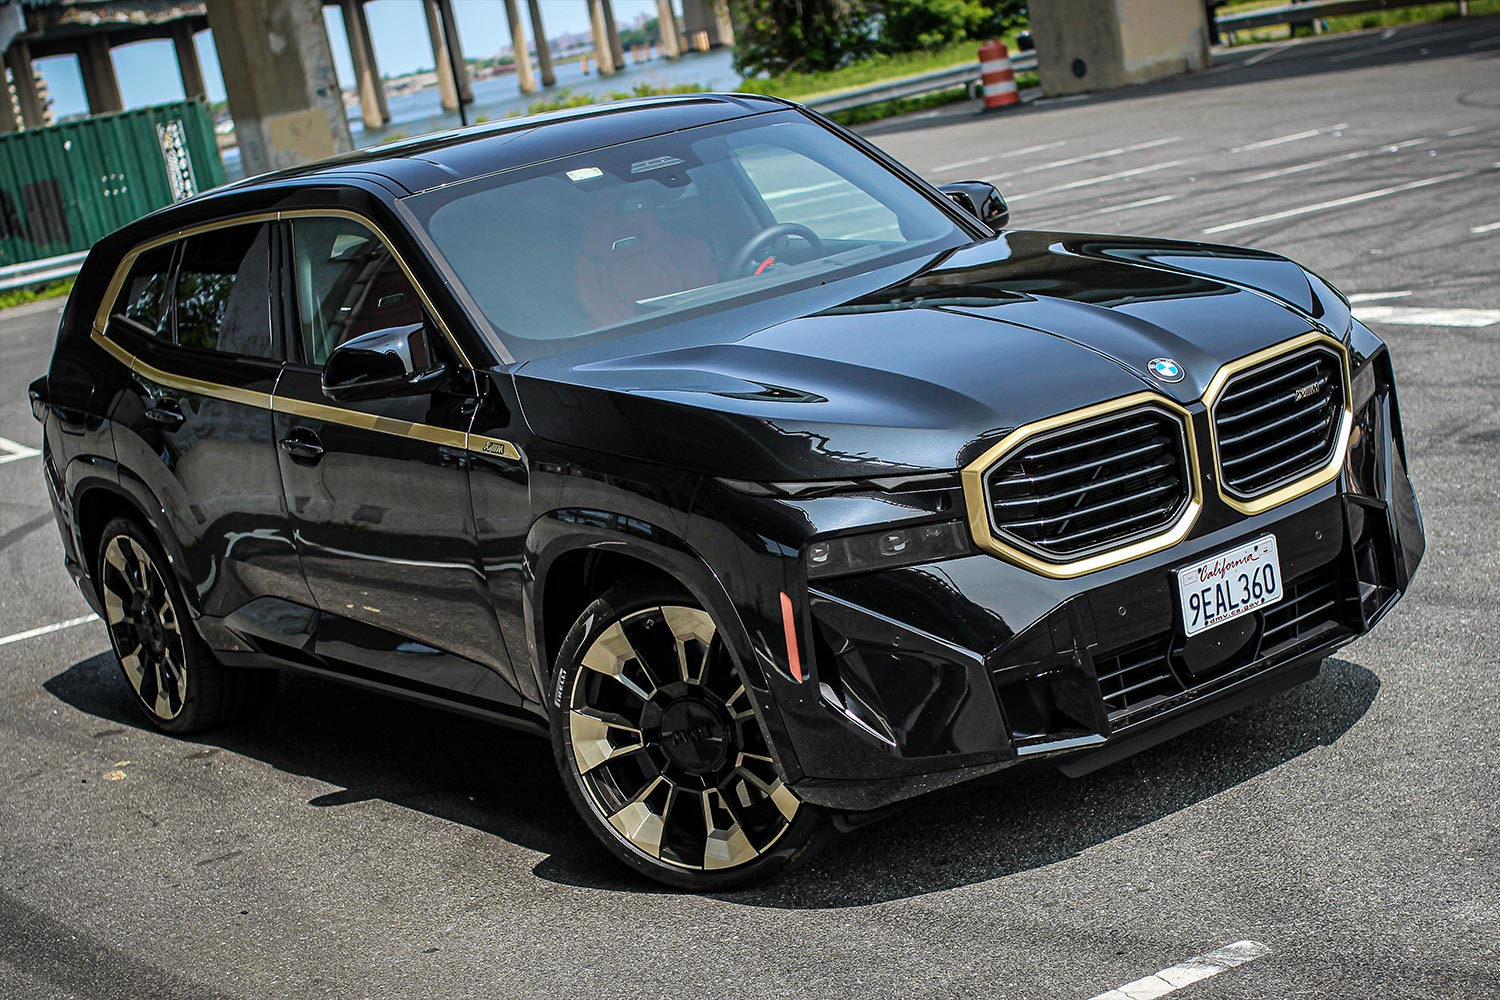 A front three-quarters photo of the 2023 BMW XM SUV with gold accents and a black paint job